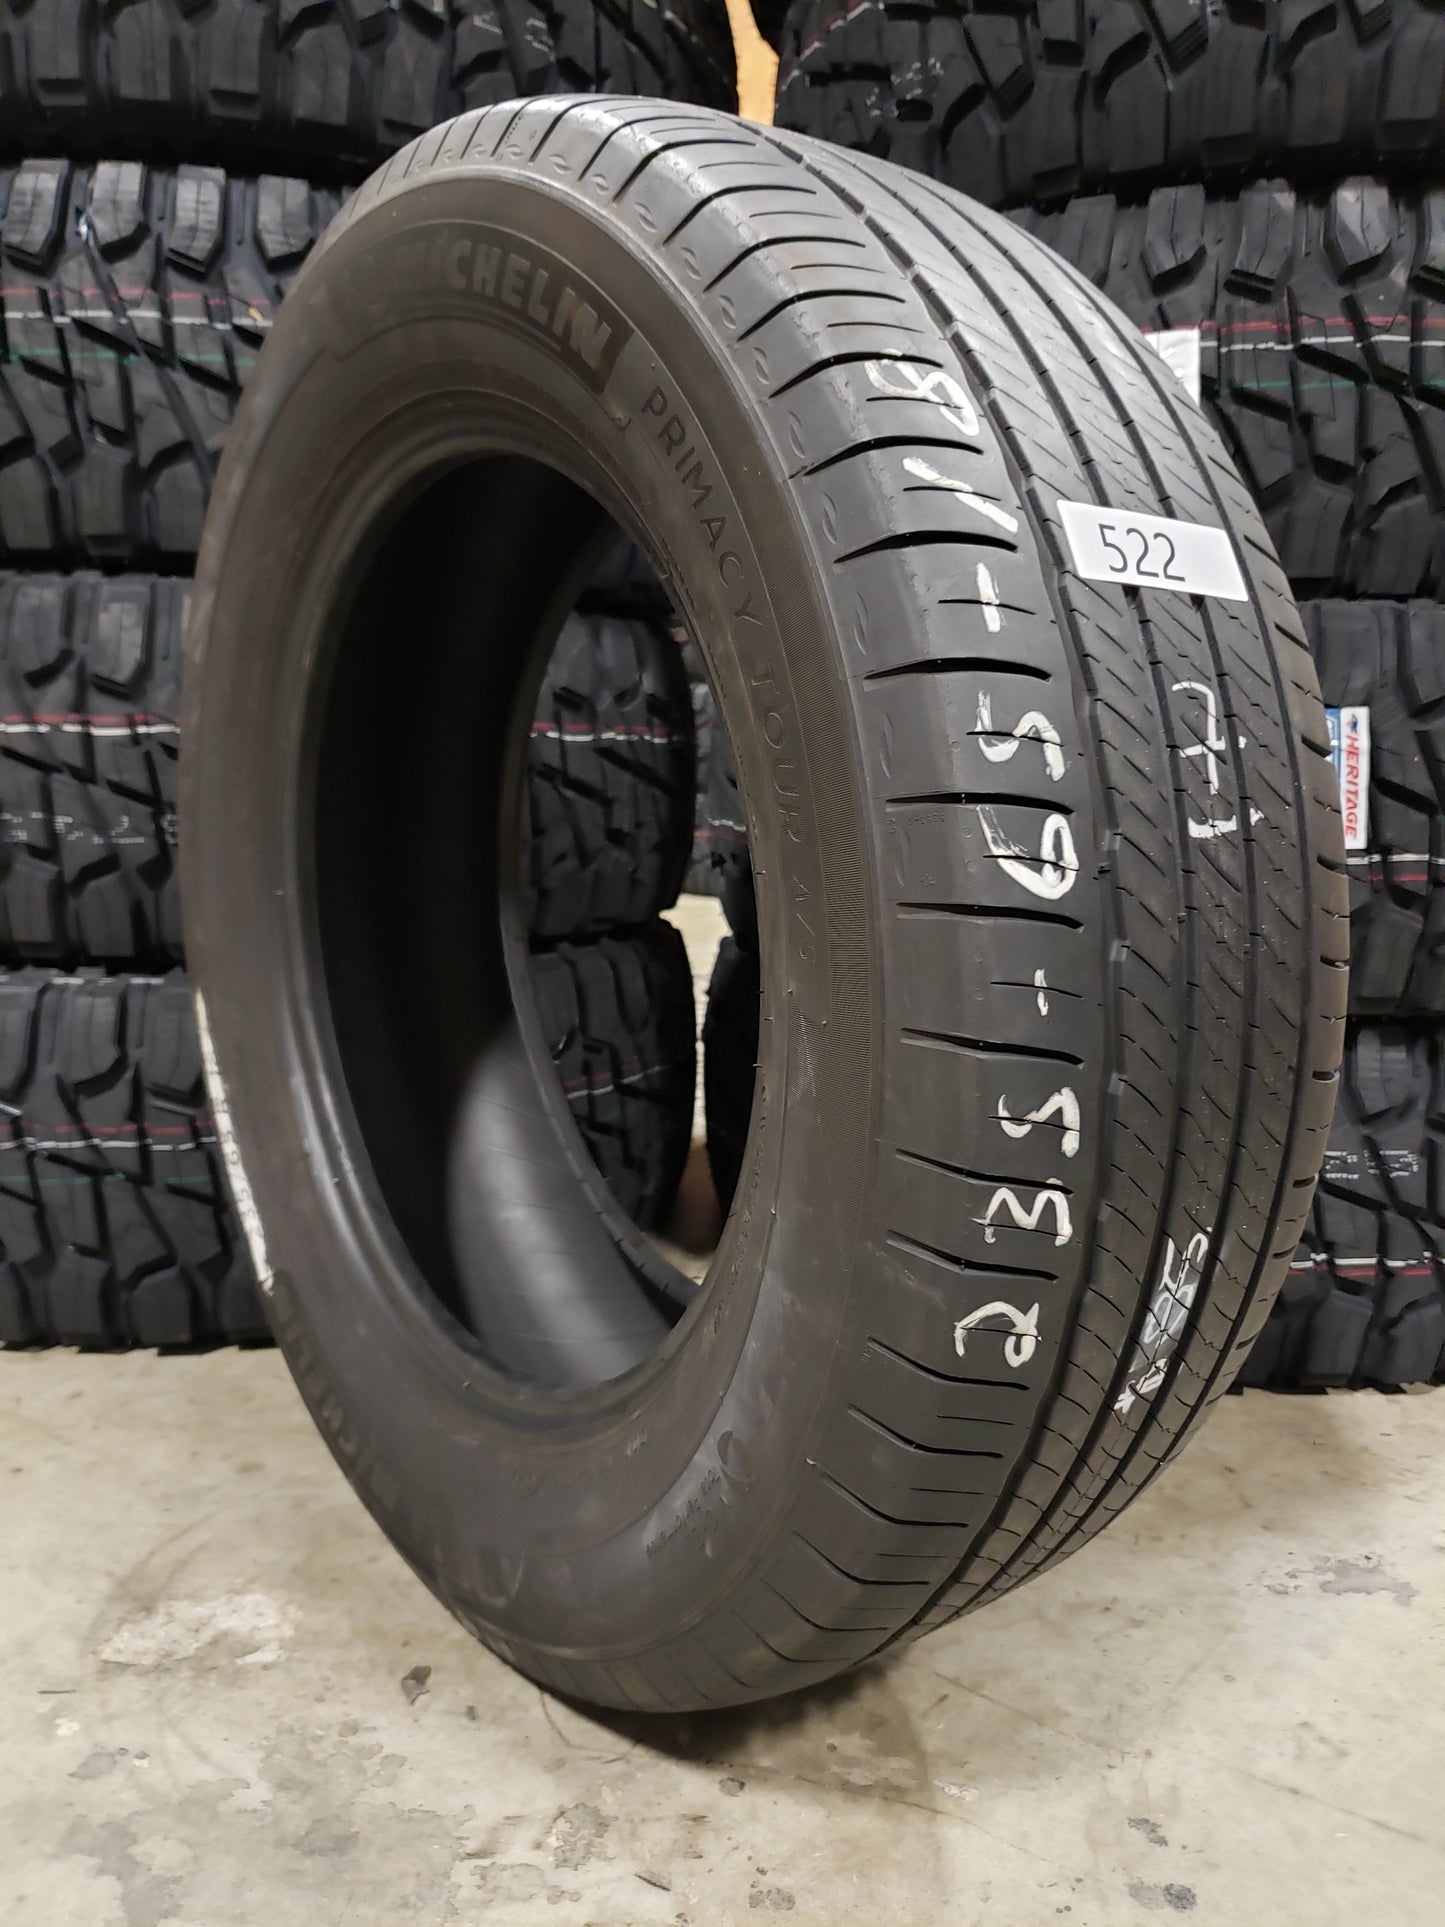 SINLGE 235/65R18 Michelin Primacy Tour A/S 106 H - Used Tires